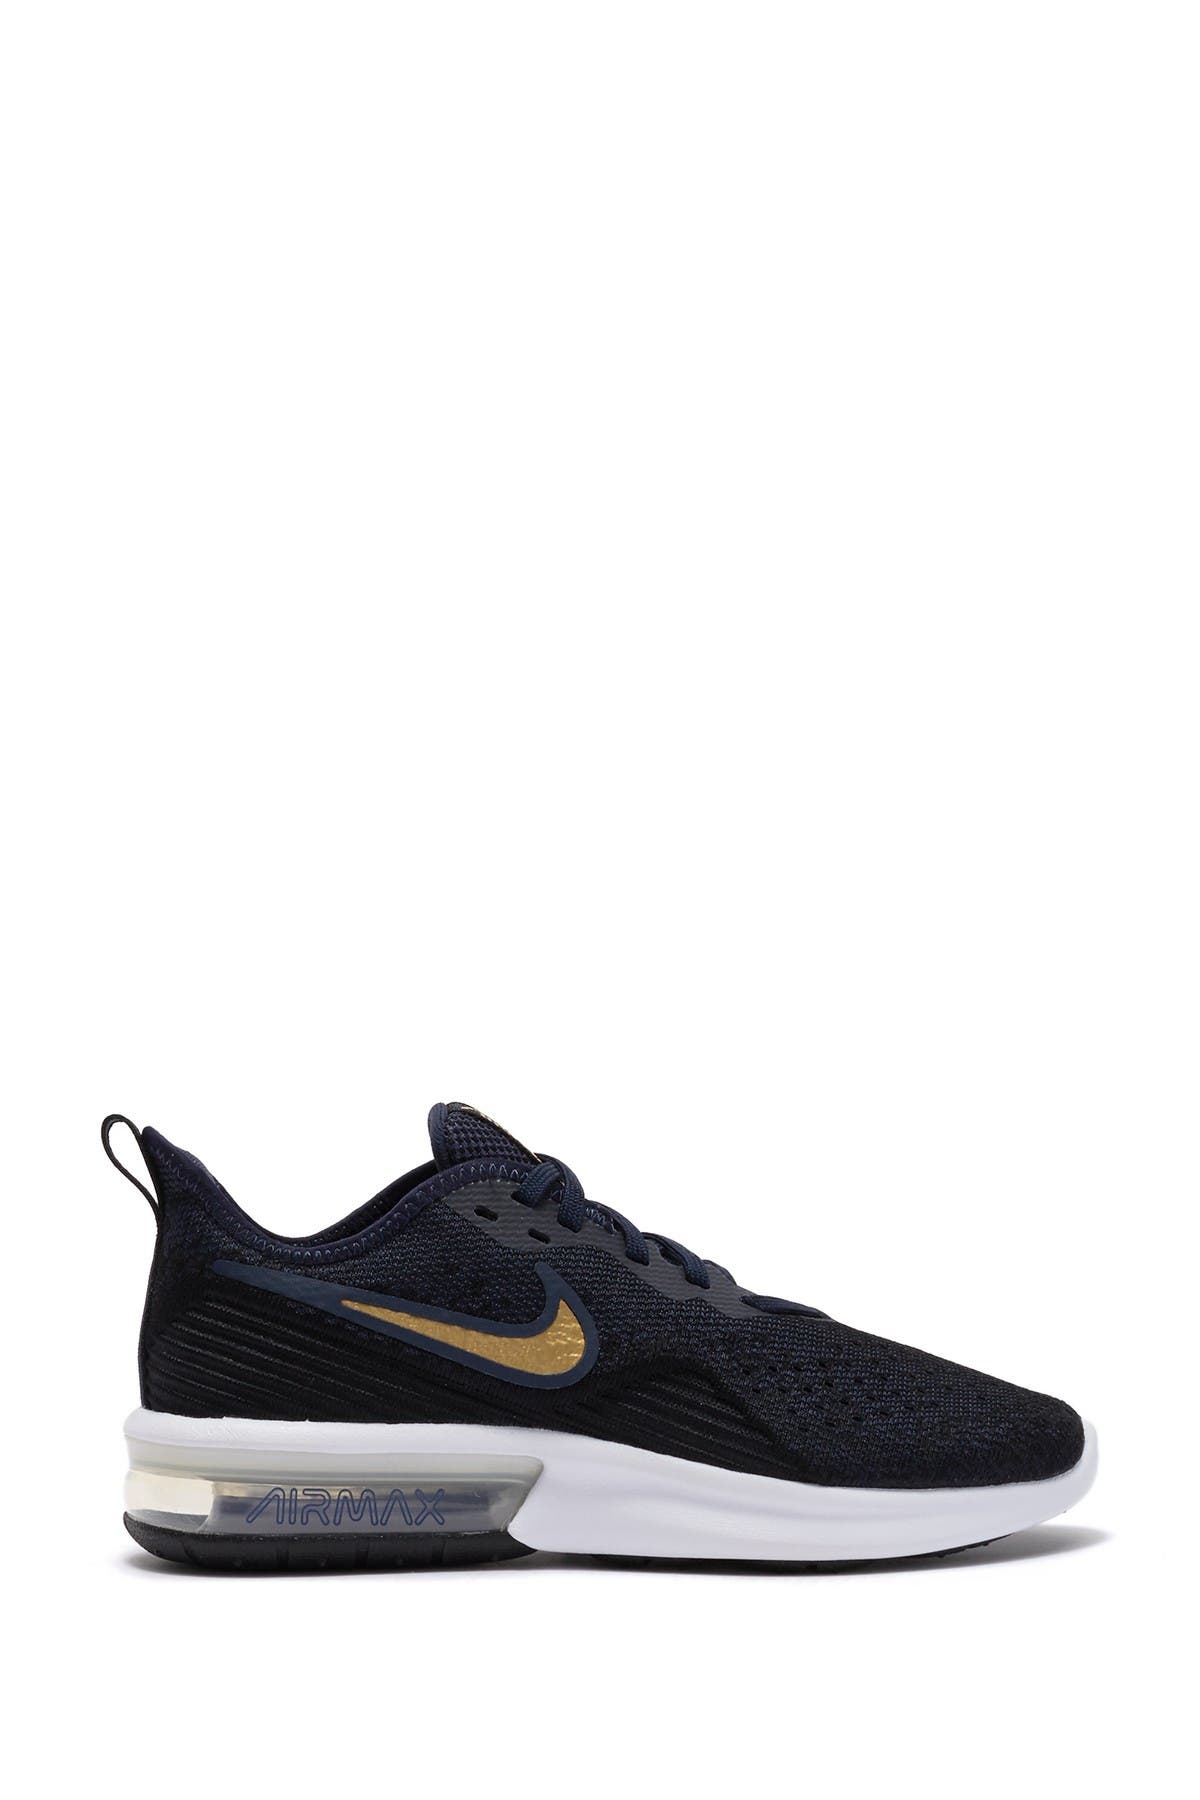 nike performance sequent 4